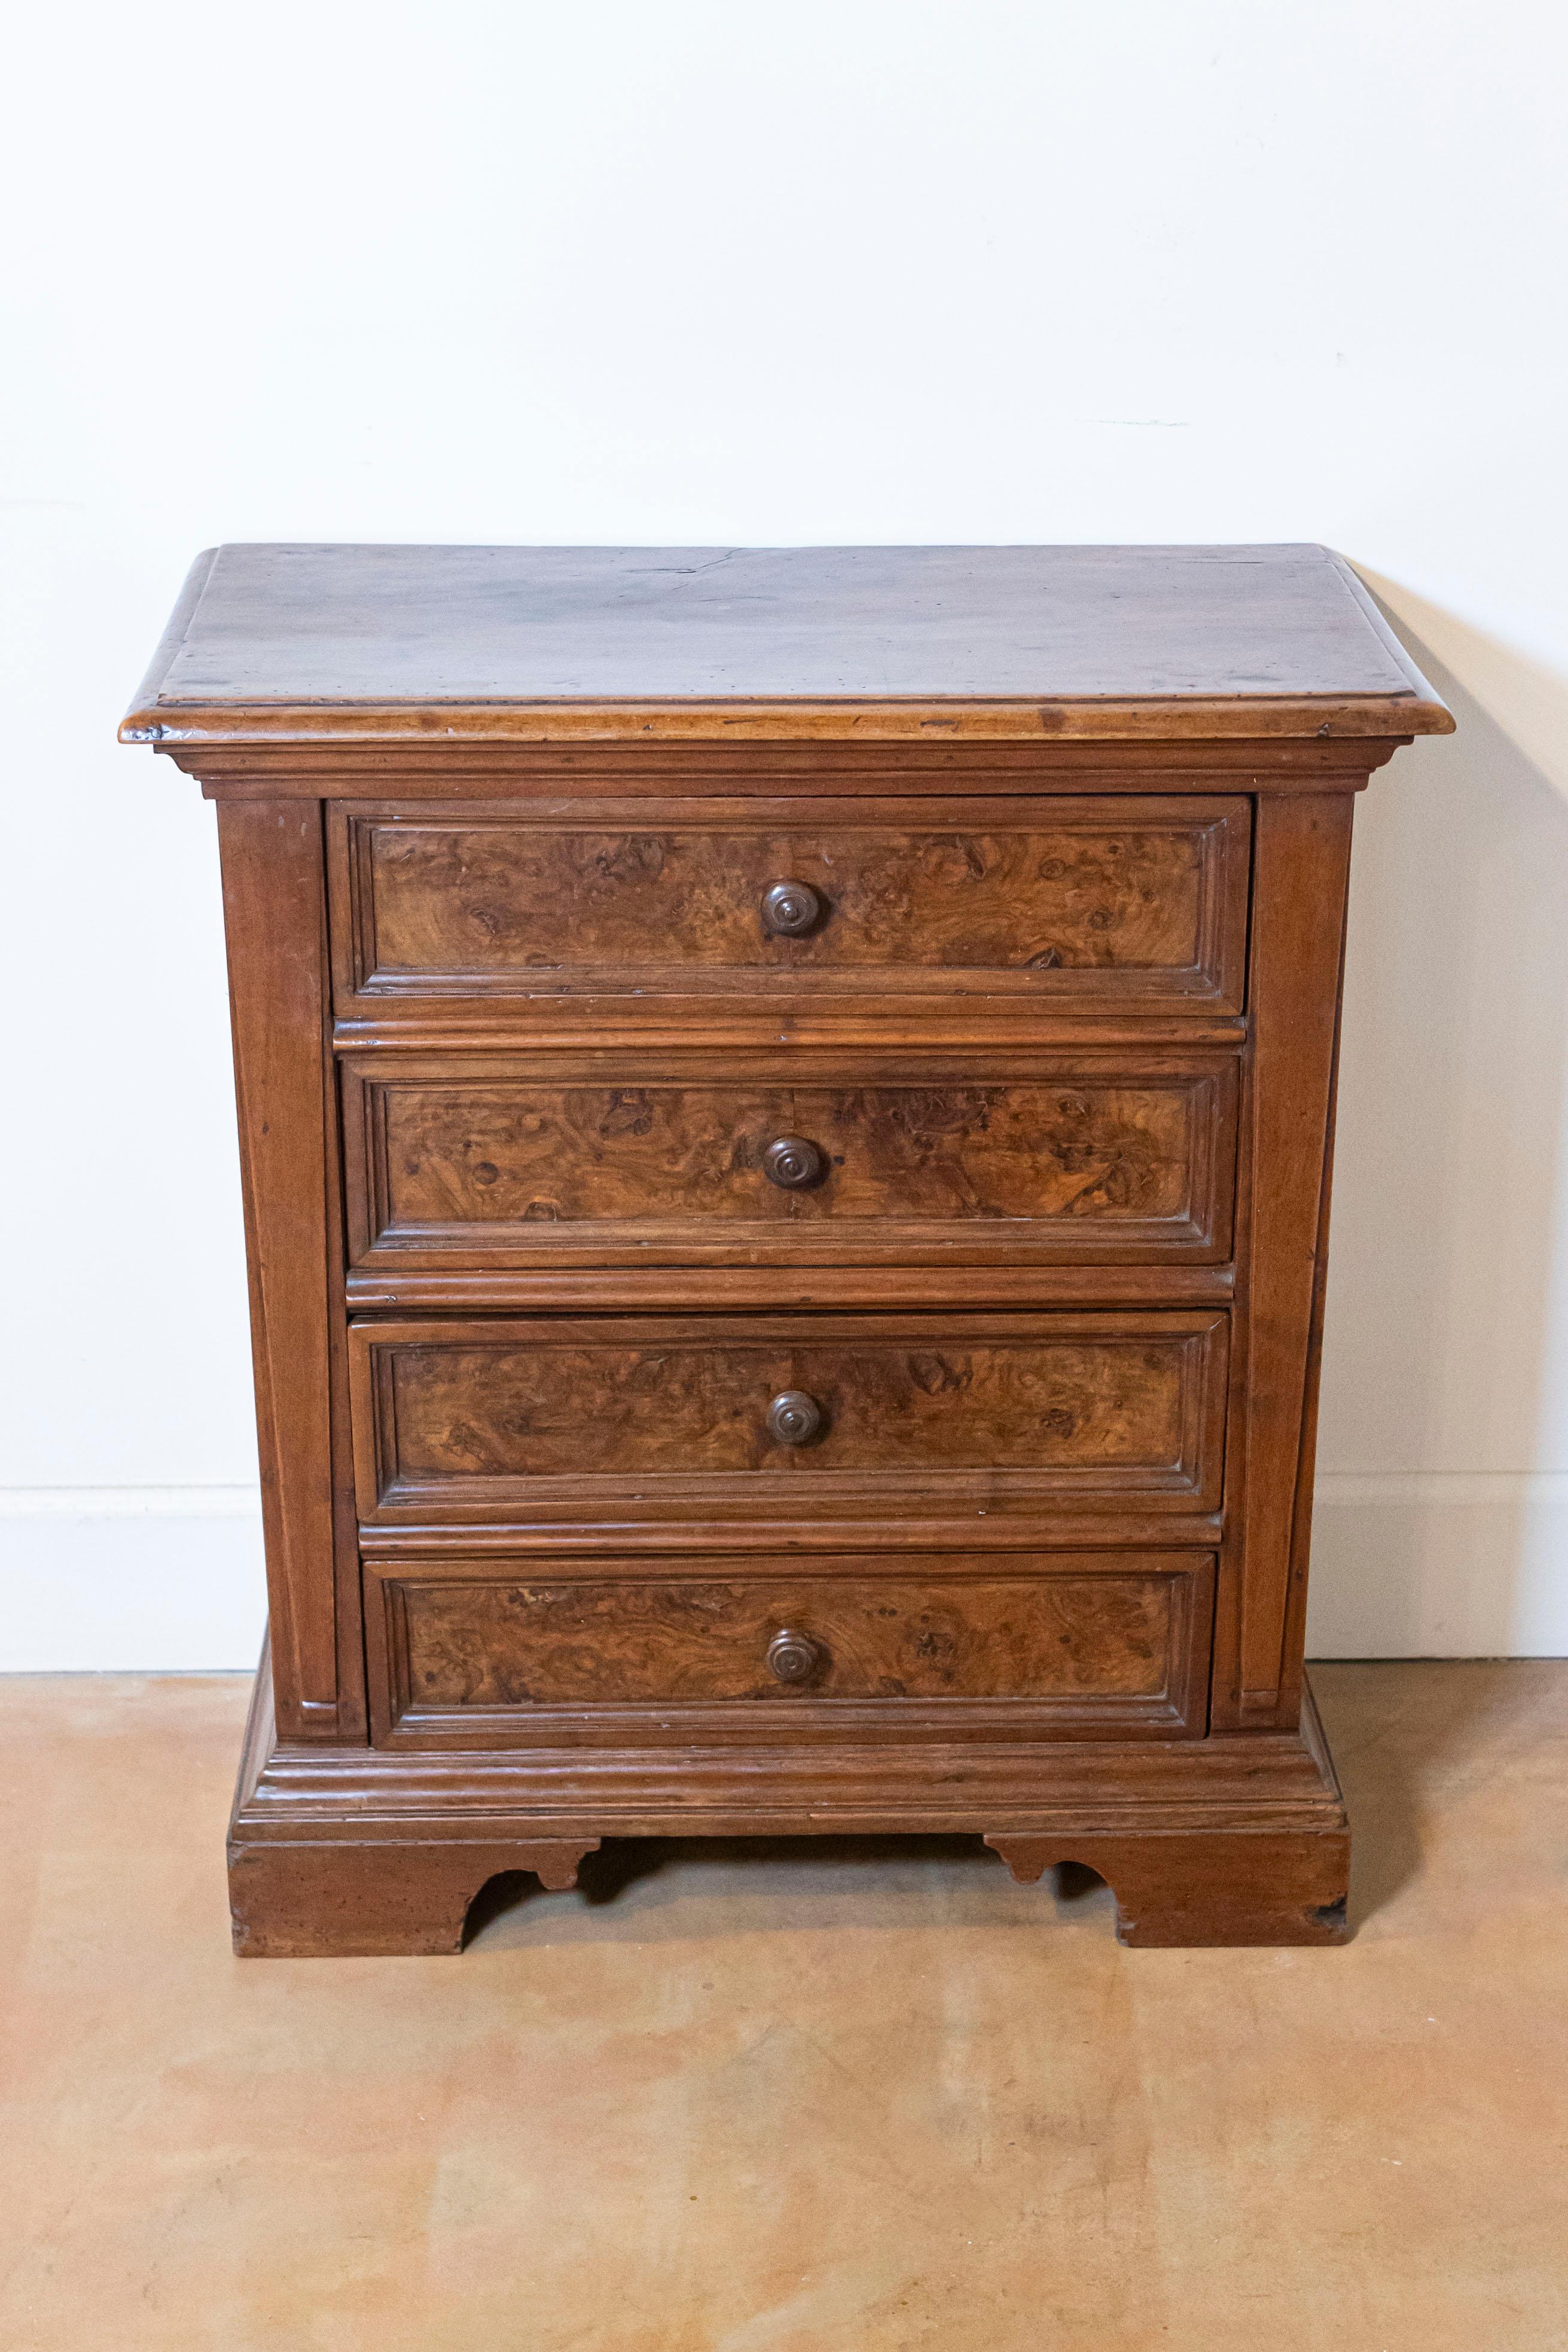 Veneer Italian 1840s Bedside Chest with Four Drawers, Burl Panels and Bracket Feet For Sale